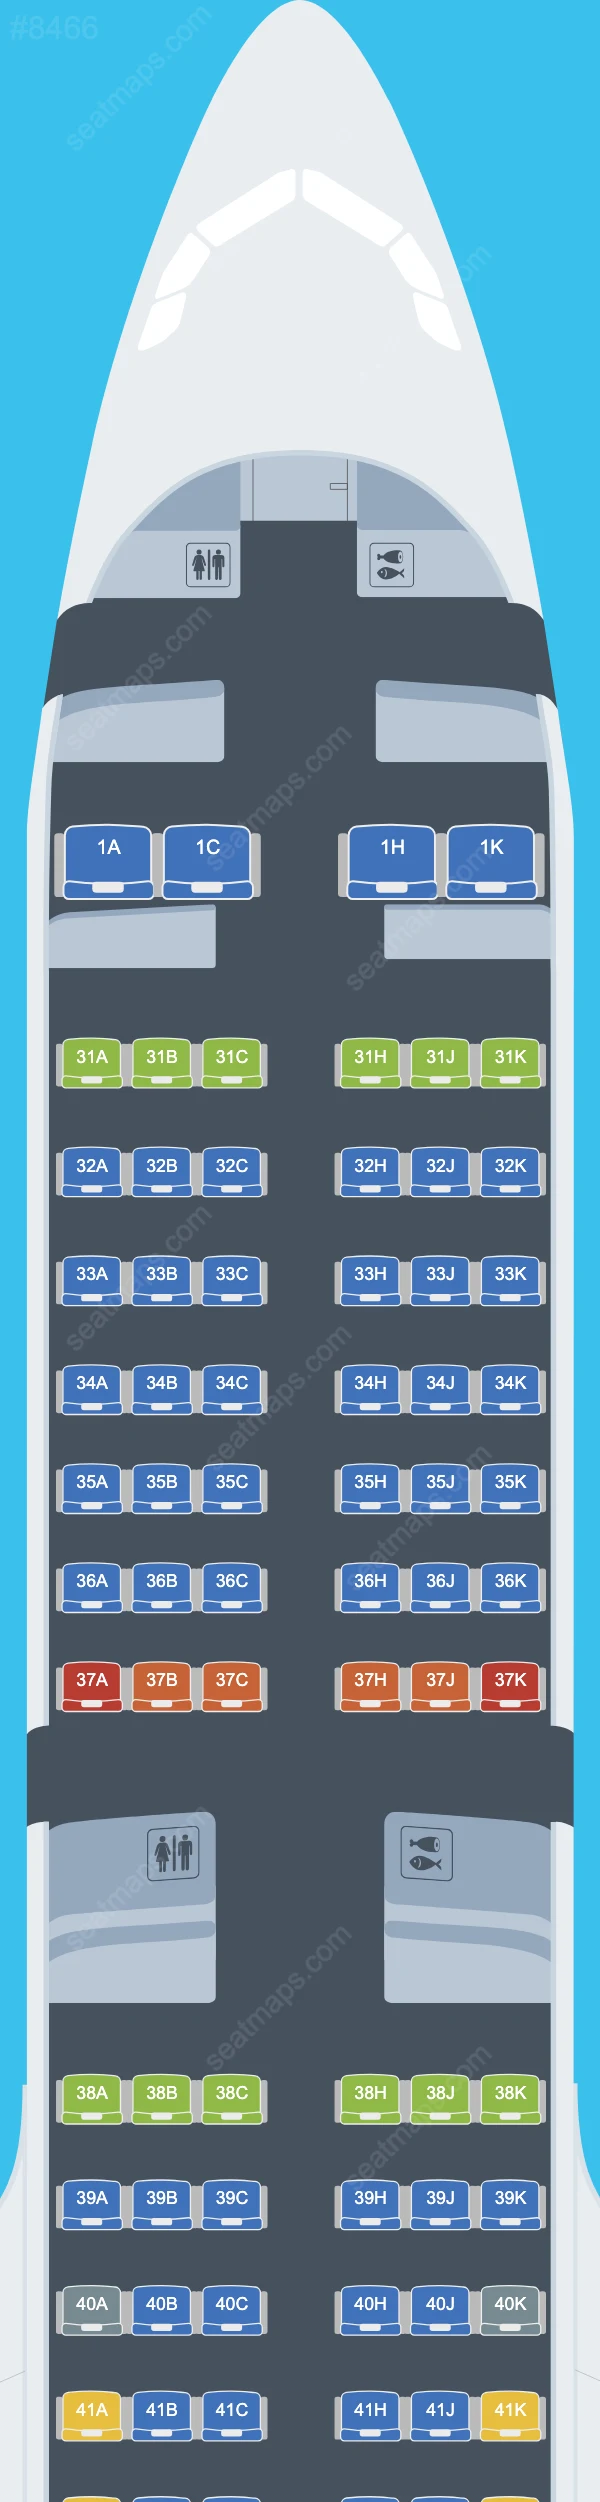 China Southern Airbus A321 Seat Maps A321-200neo V.2